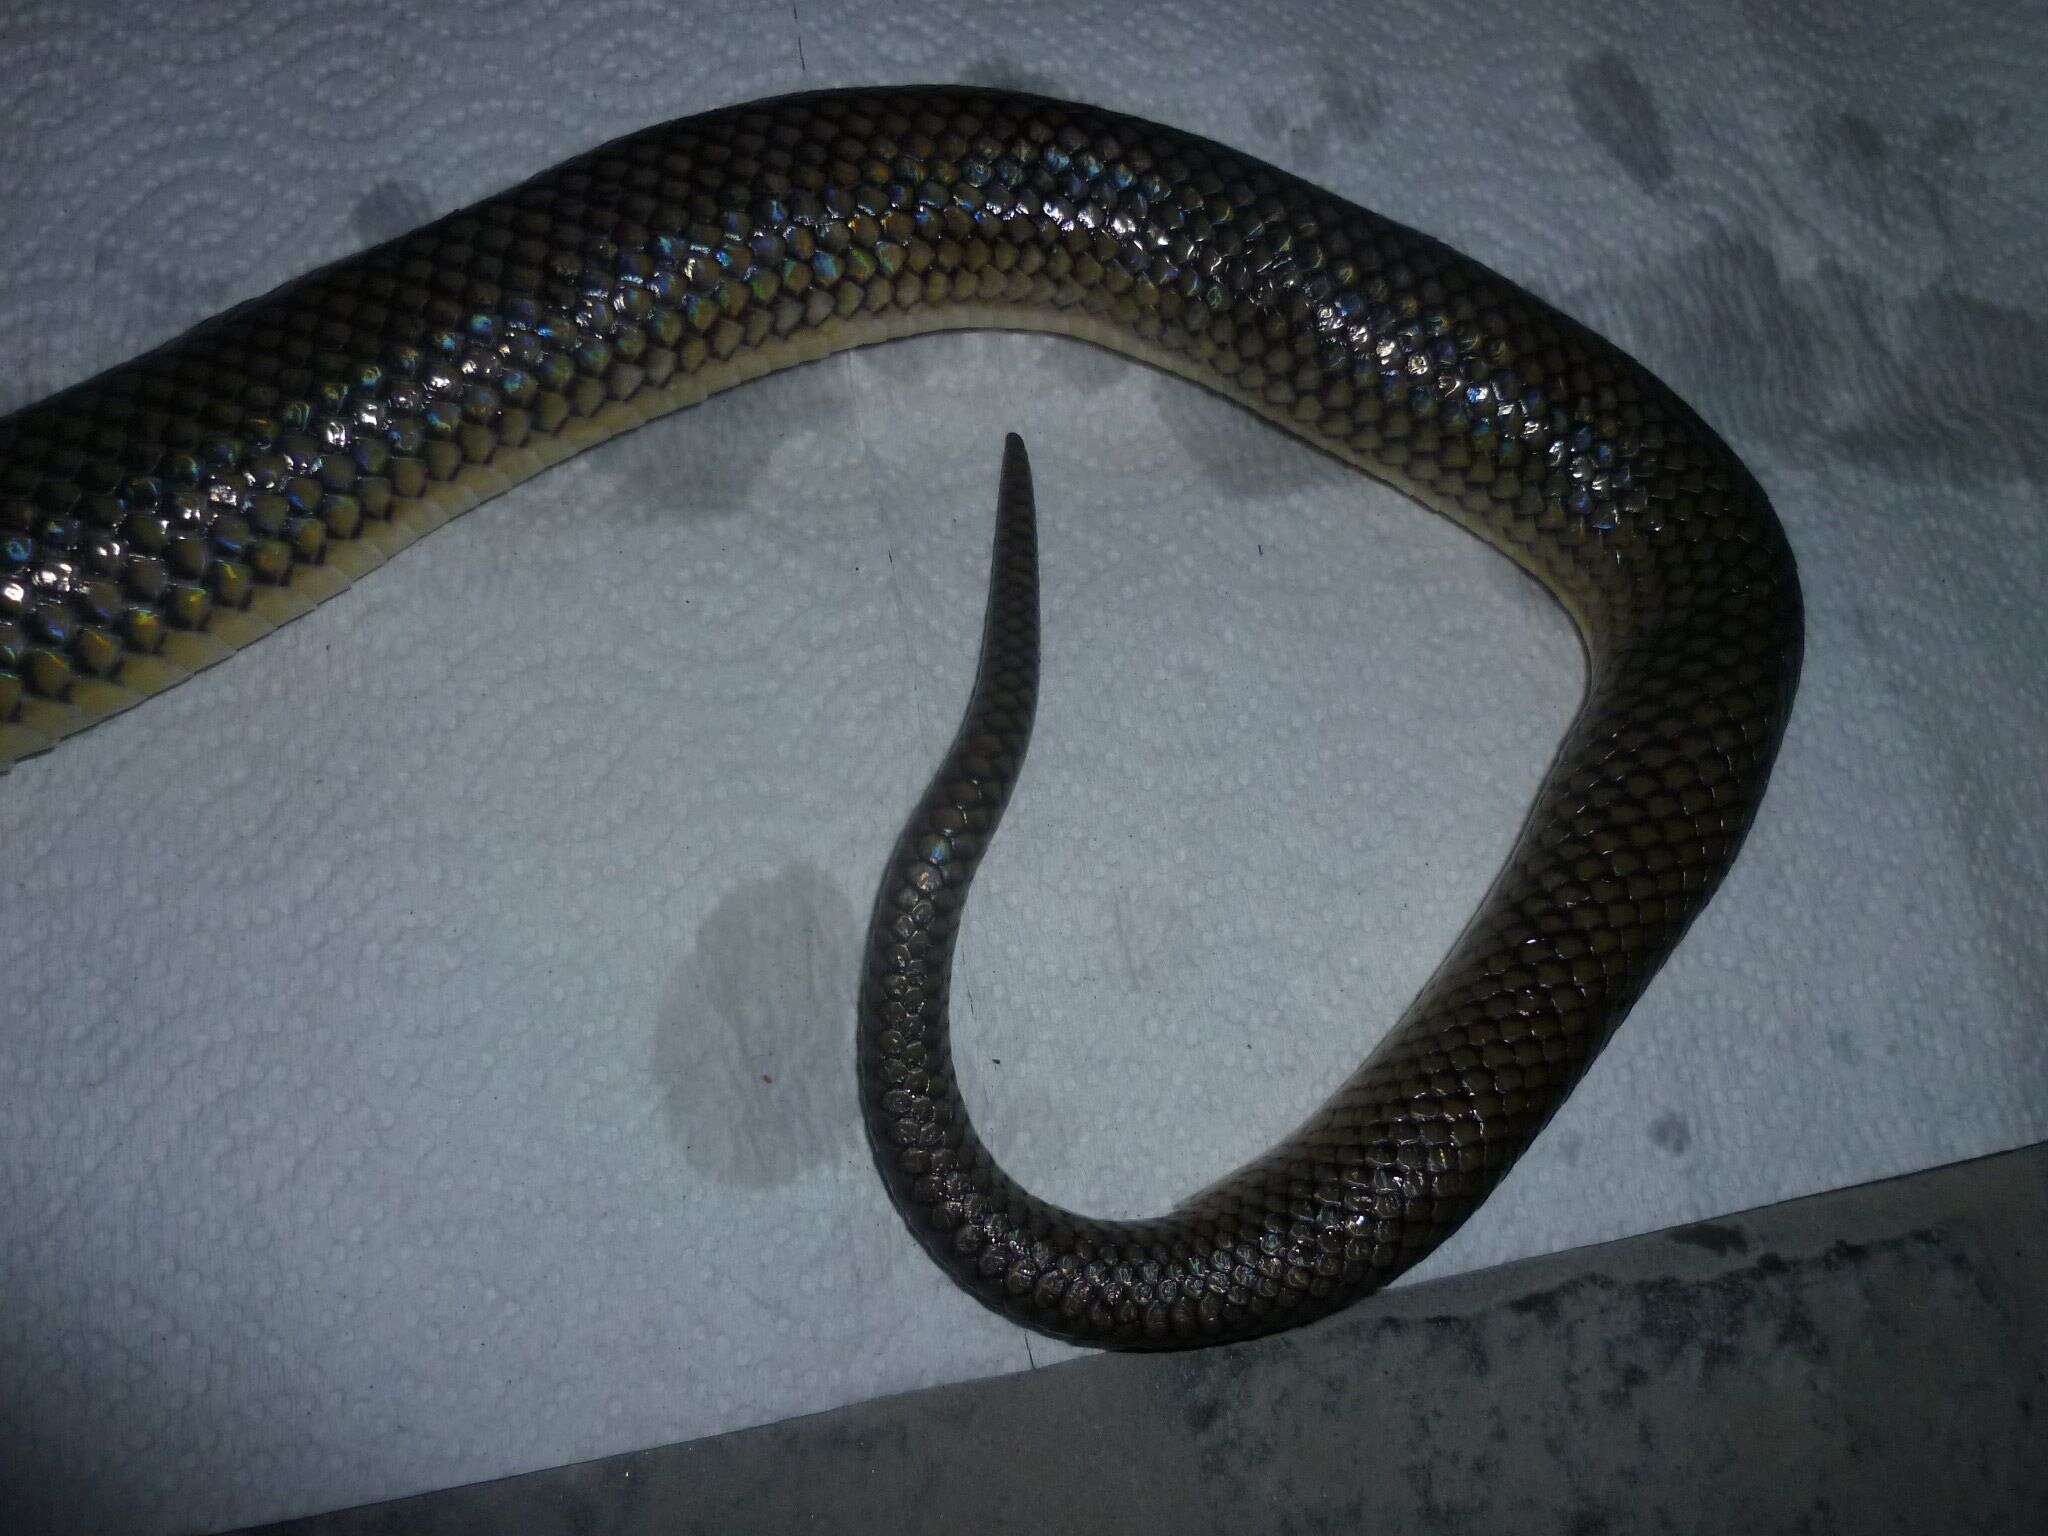 Image of Paraphimophis rusticus (Cope 1878)